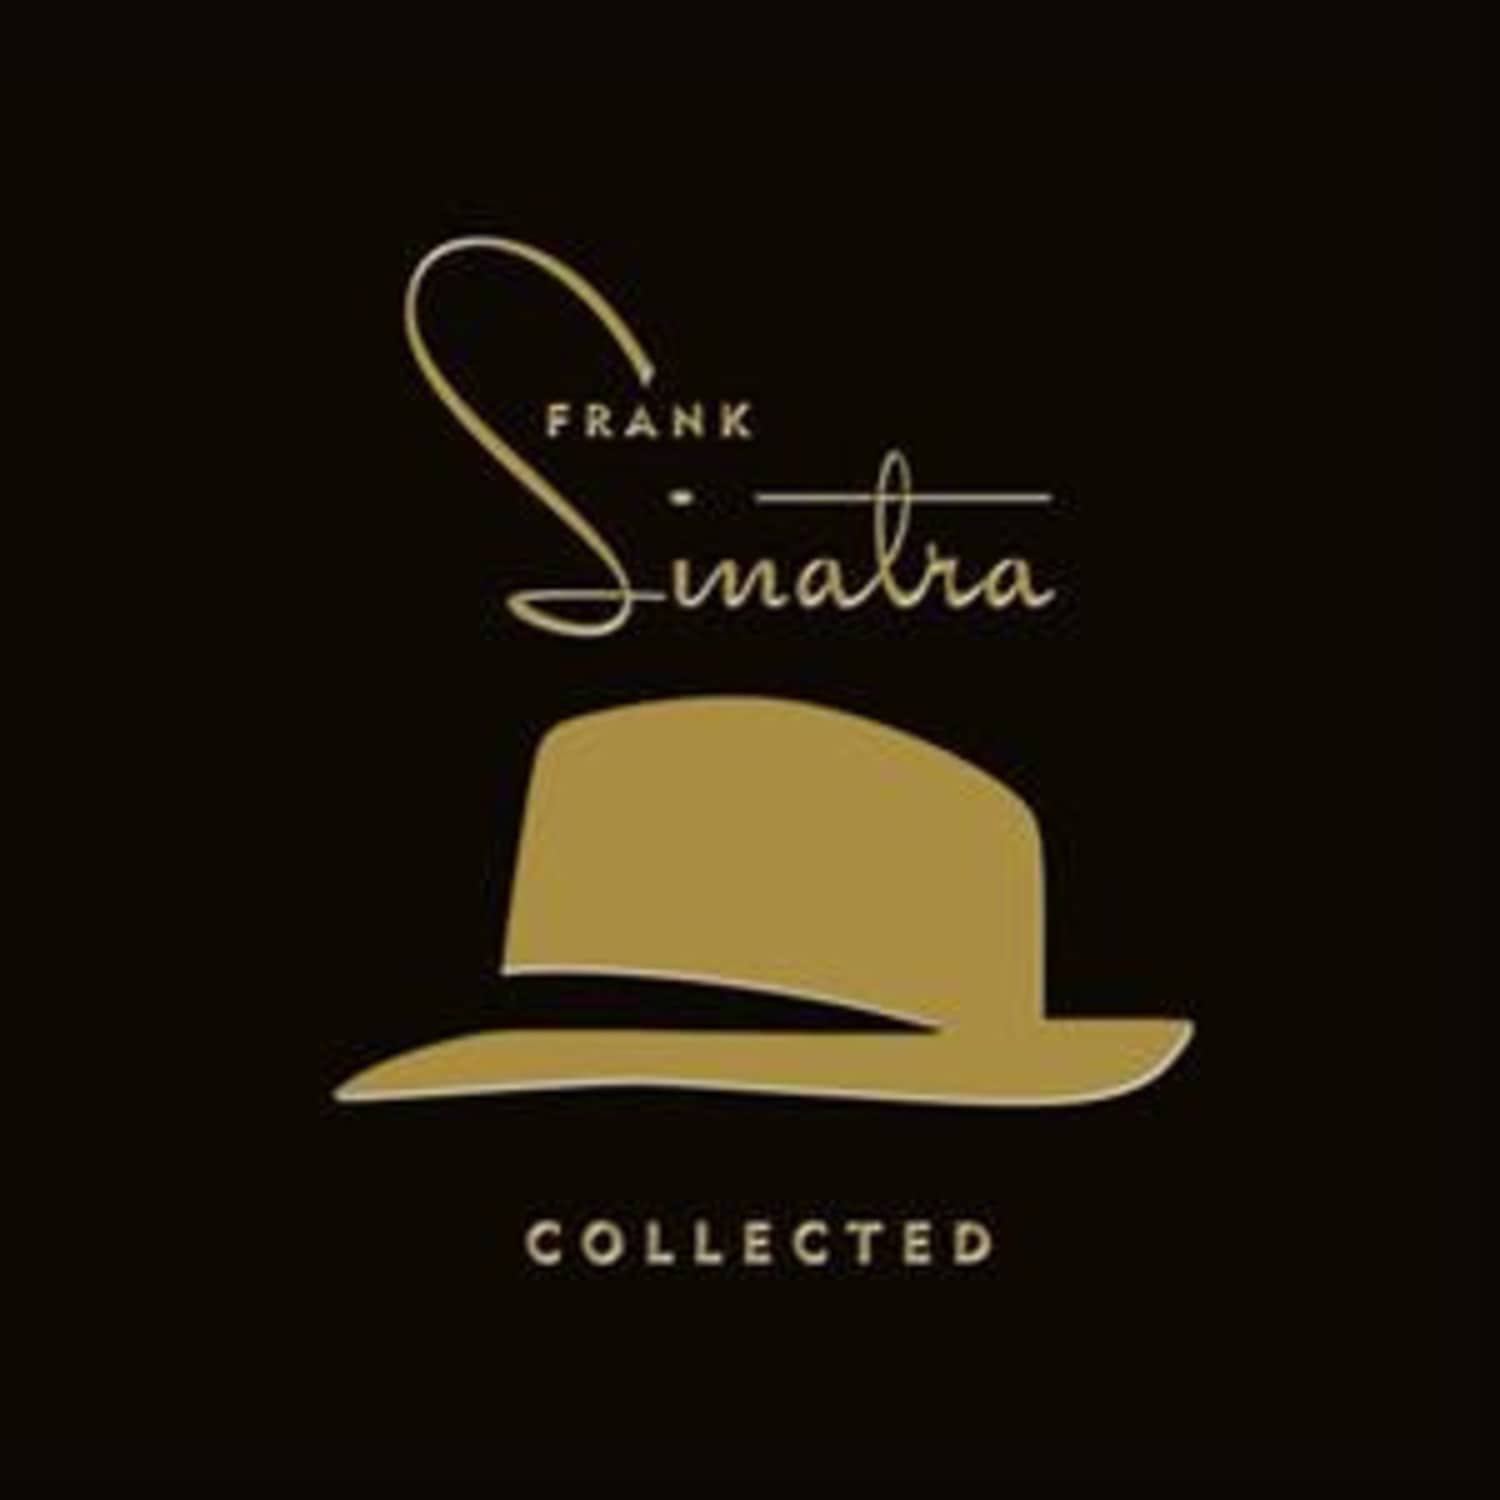 Frank Sinatra - COLLECTED 